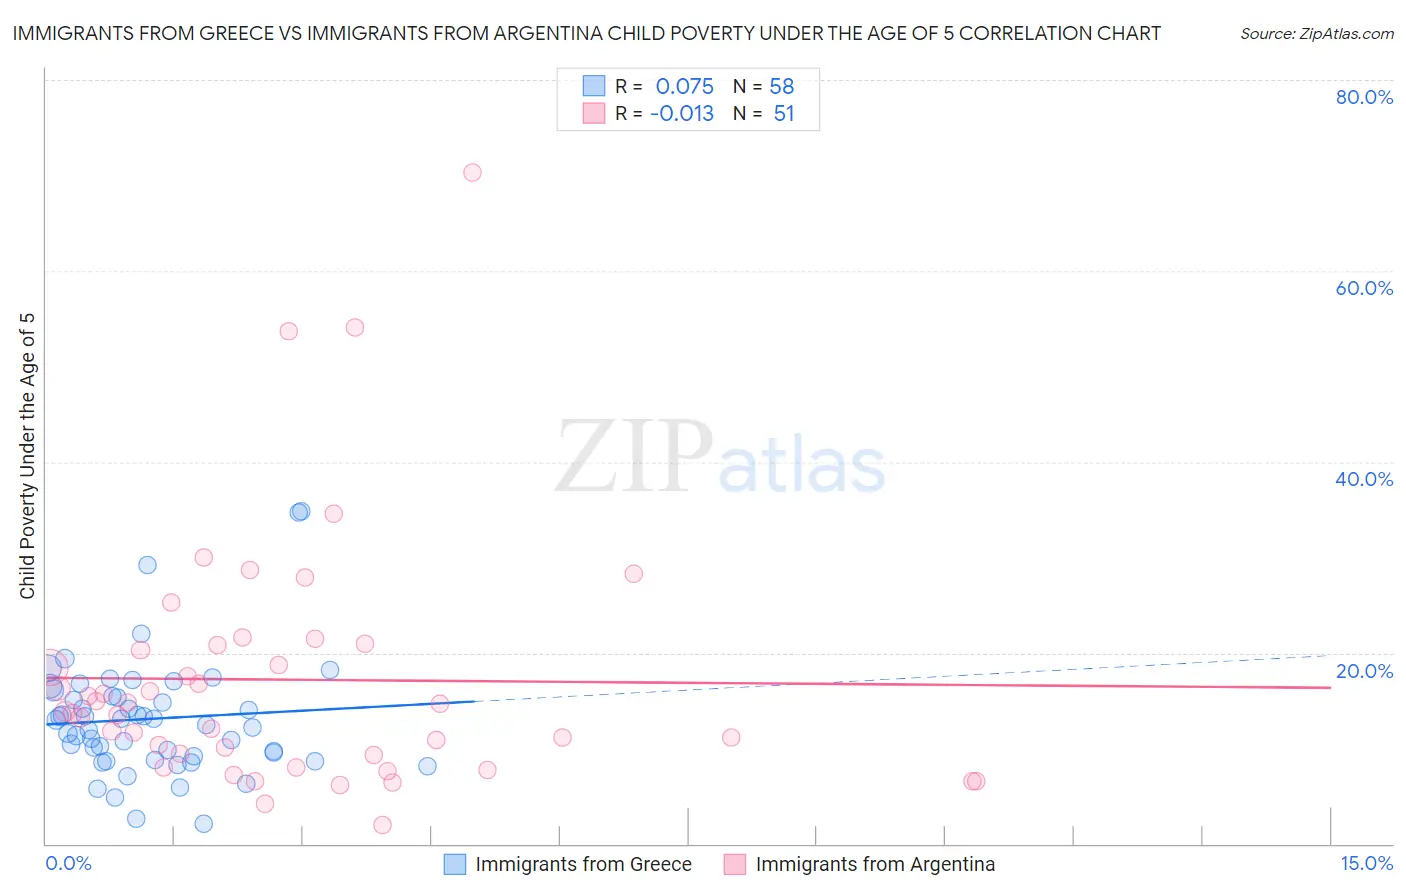 Immigrants from Greece vs Immigrants from Argentina Child Poverty Under the Age of 5